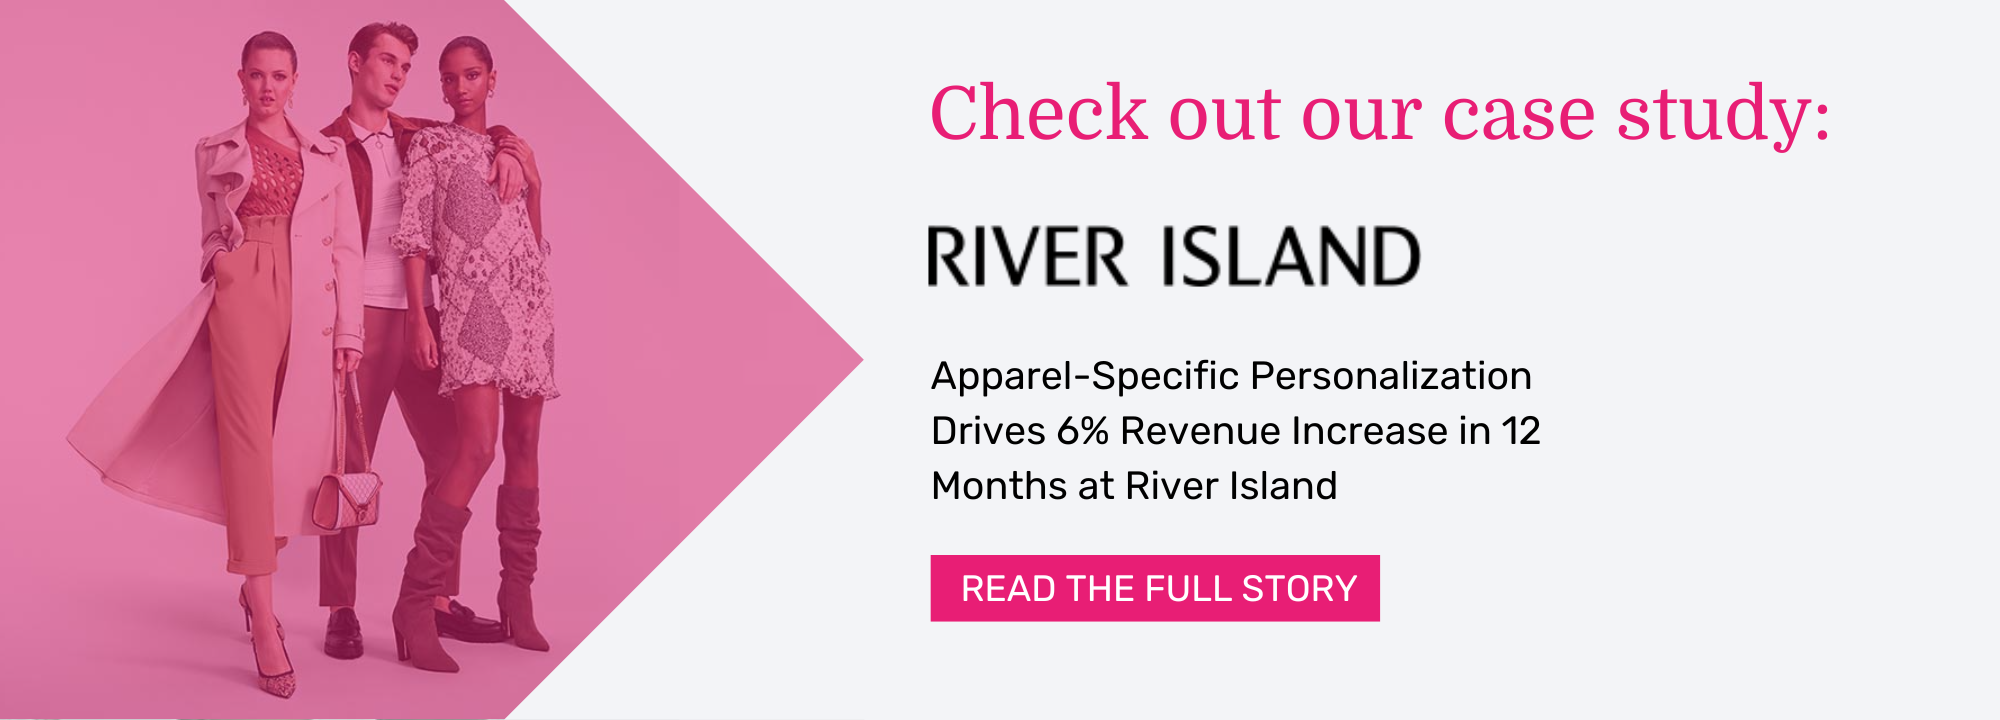 Apparel-Specific Personalization Drives 6% Revenue Increase in 12 Months at River Island